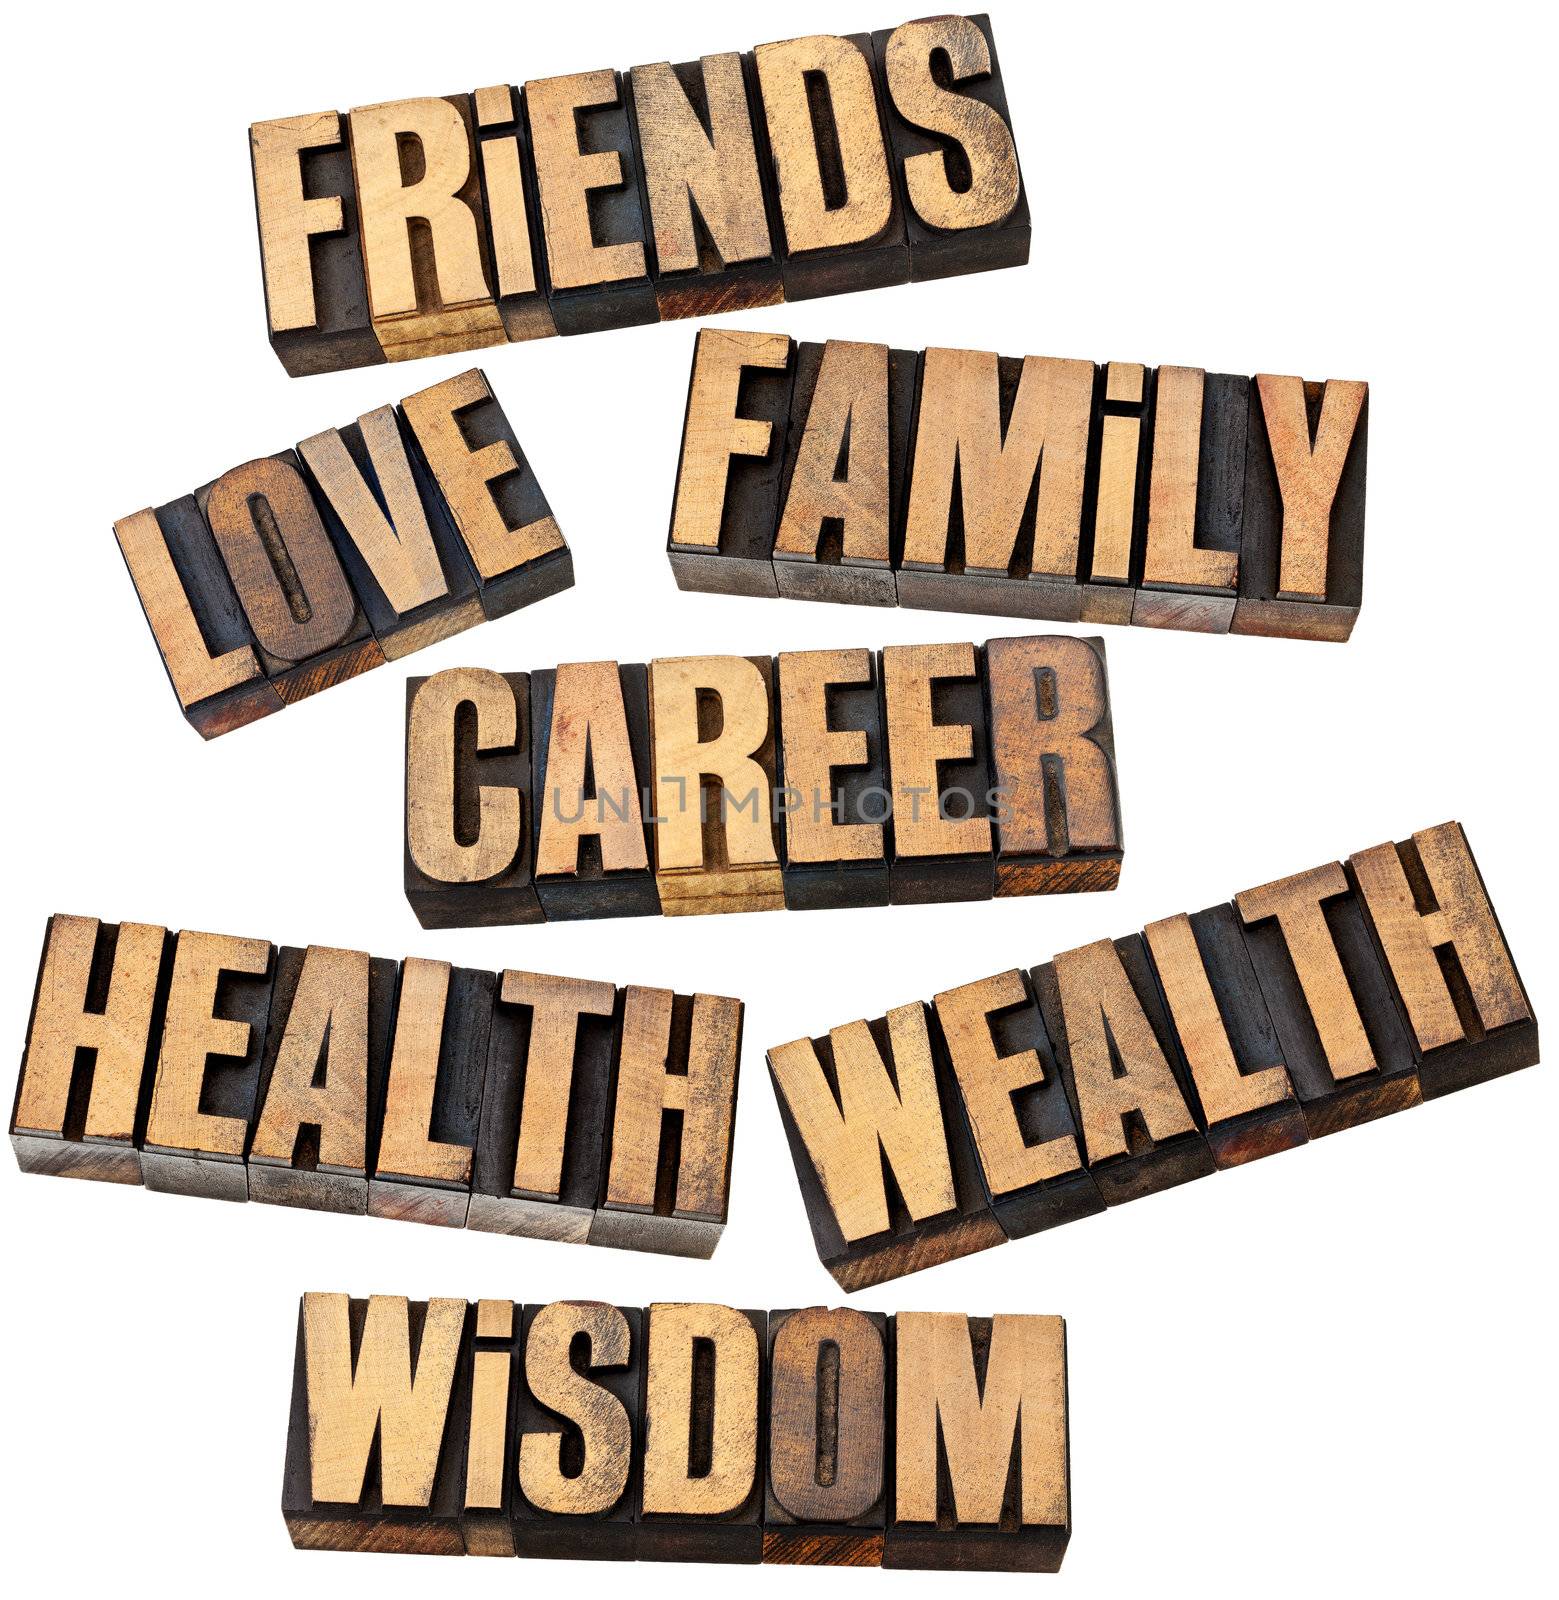 career, family, wealth, love, friends, health, wisdom  - list of popular life values  - a collage of isolated words in vintage letterpress wood type